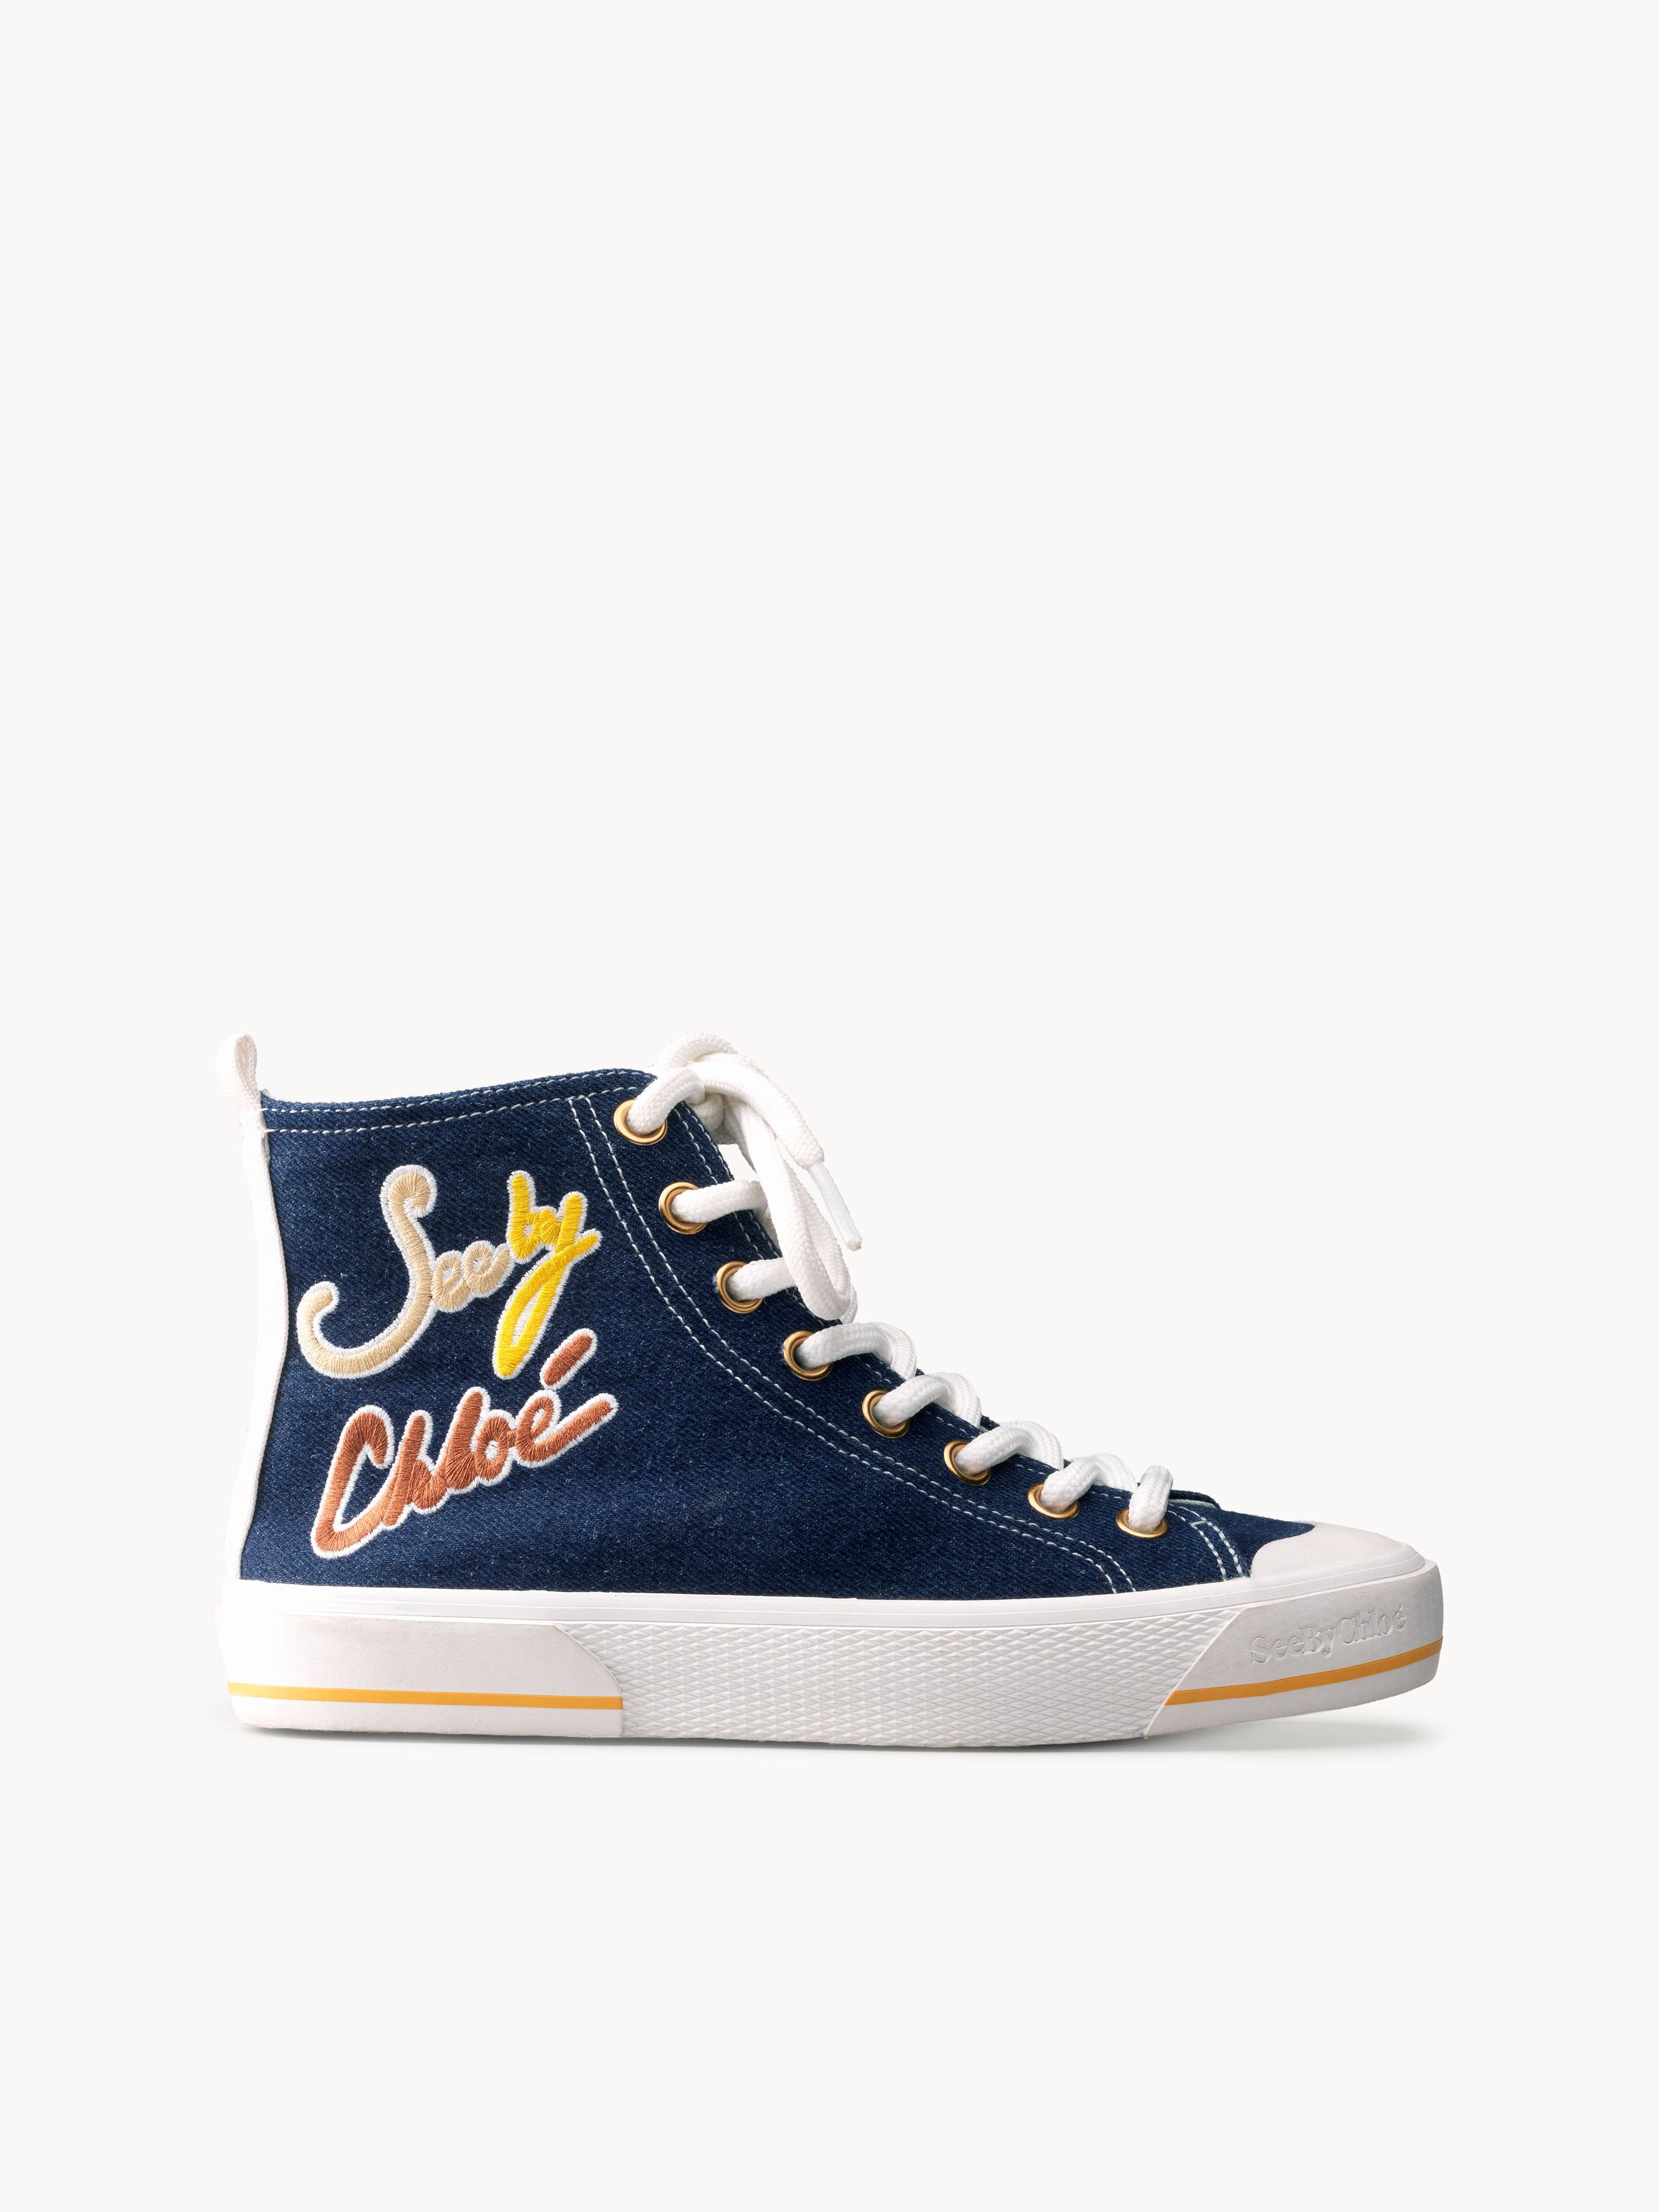 SEE BY CHLOÉ ARYANA SNEAKER BLUE SIZE 5 100% COTTON